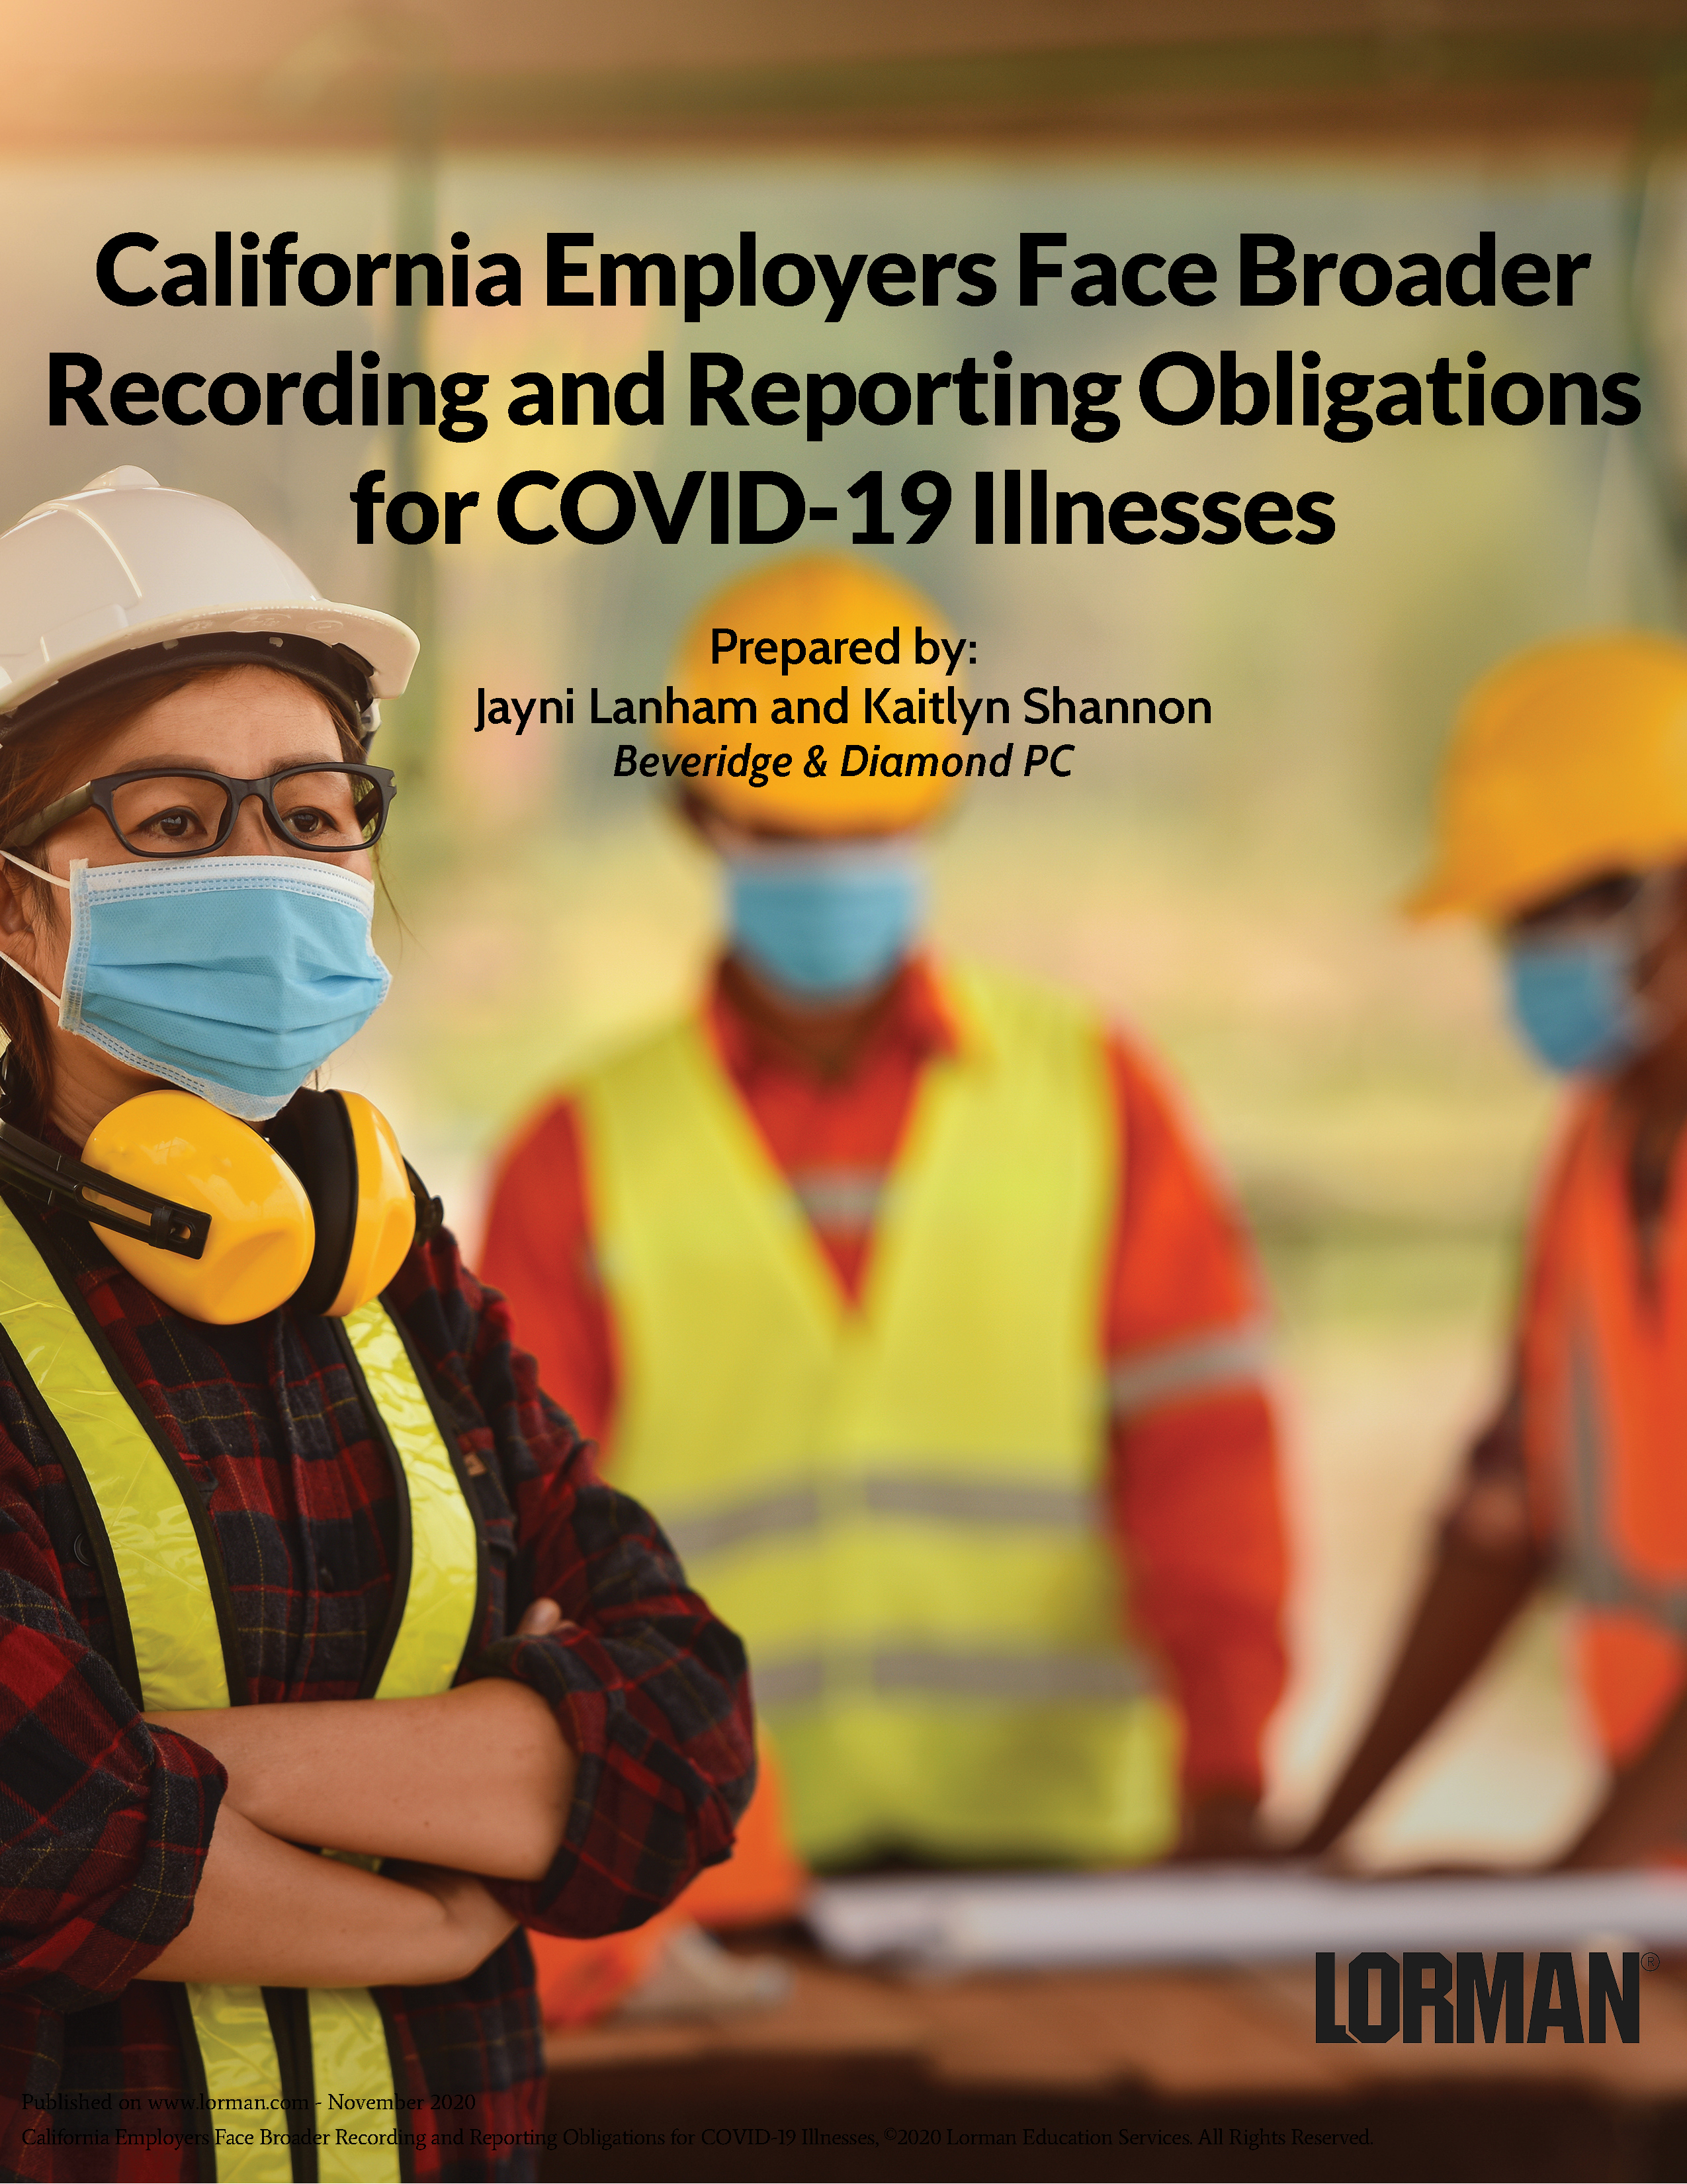 California Employers Face Broader Recording and Reporting Obligations for COVID-19 Illnesses